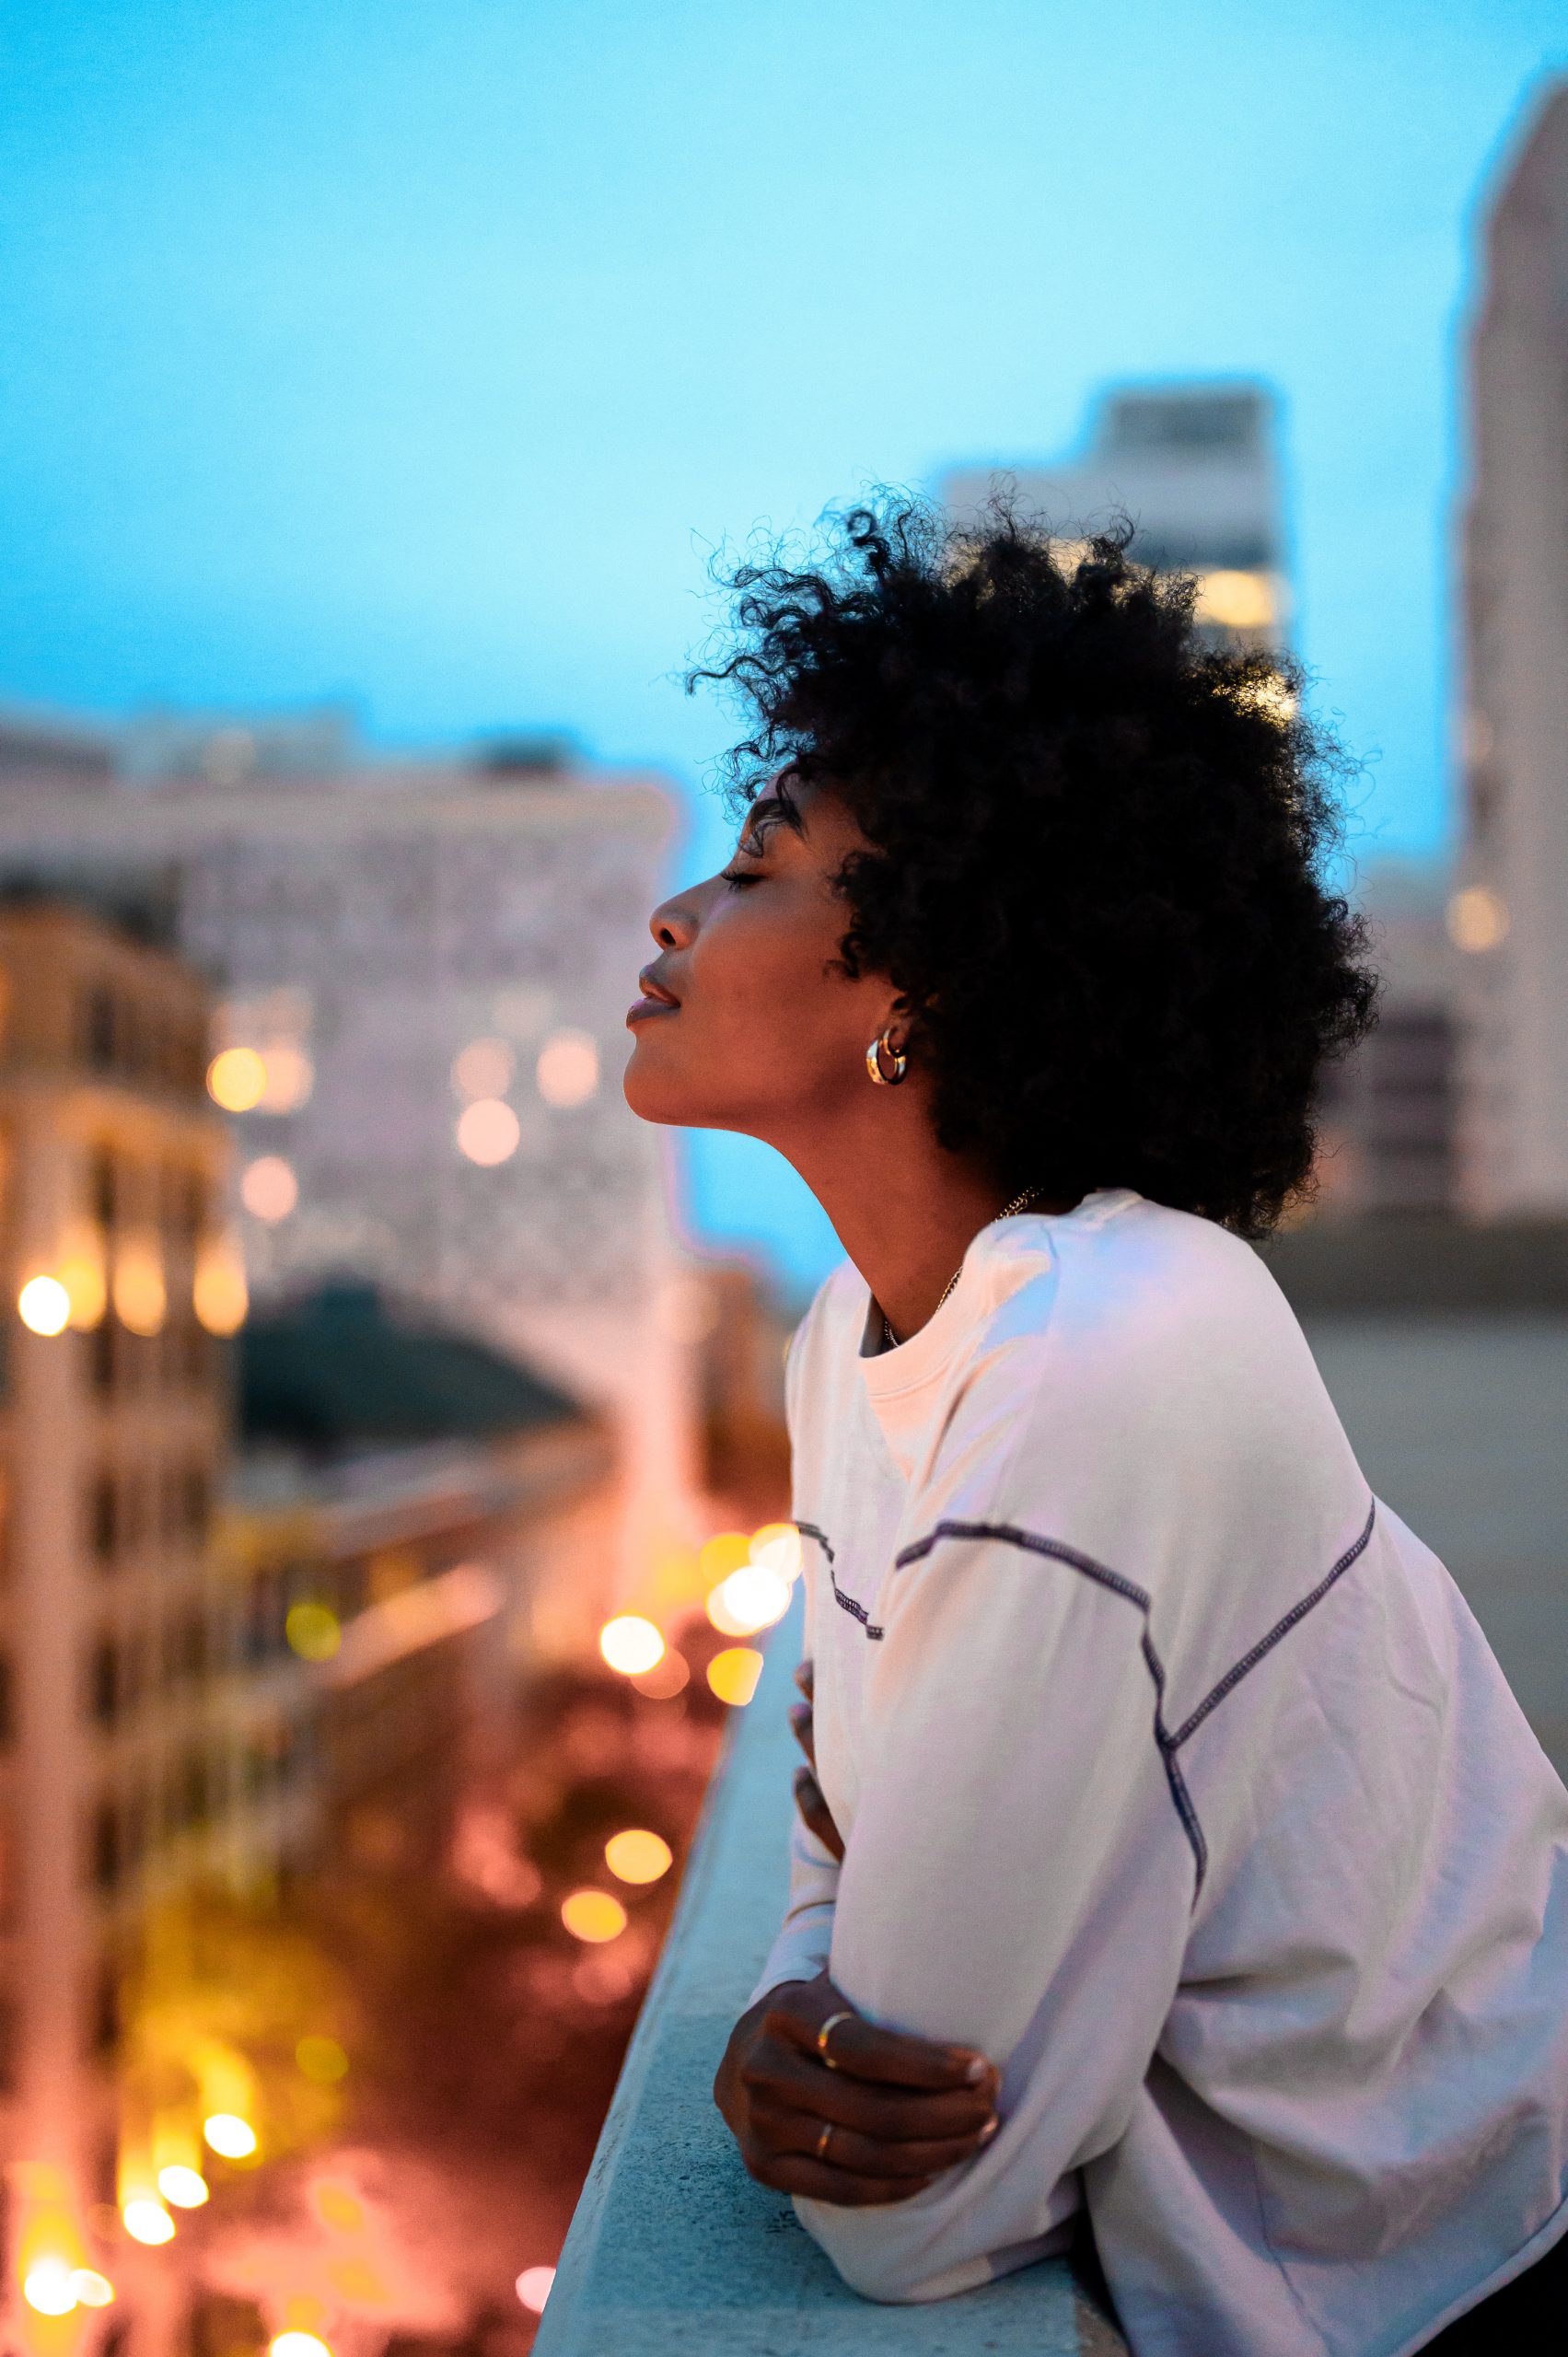 Black woman enjoying the breeze on the balcony of a building, she looks relaxed